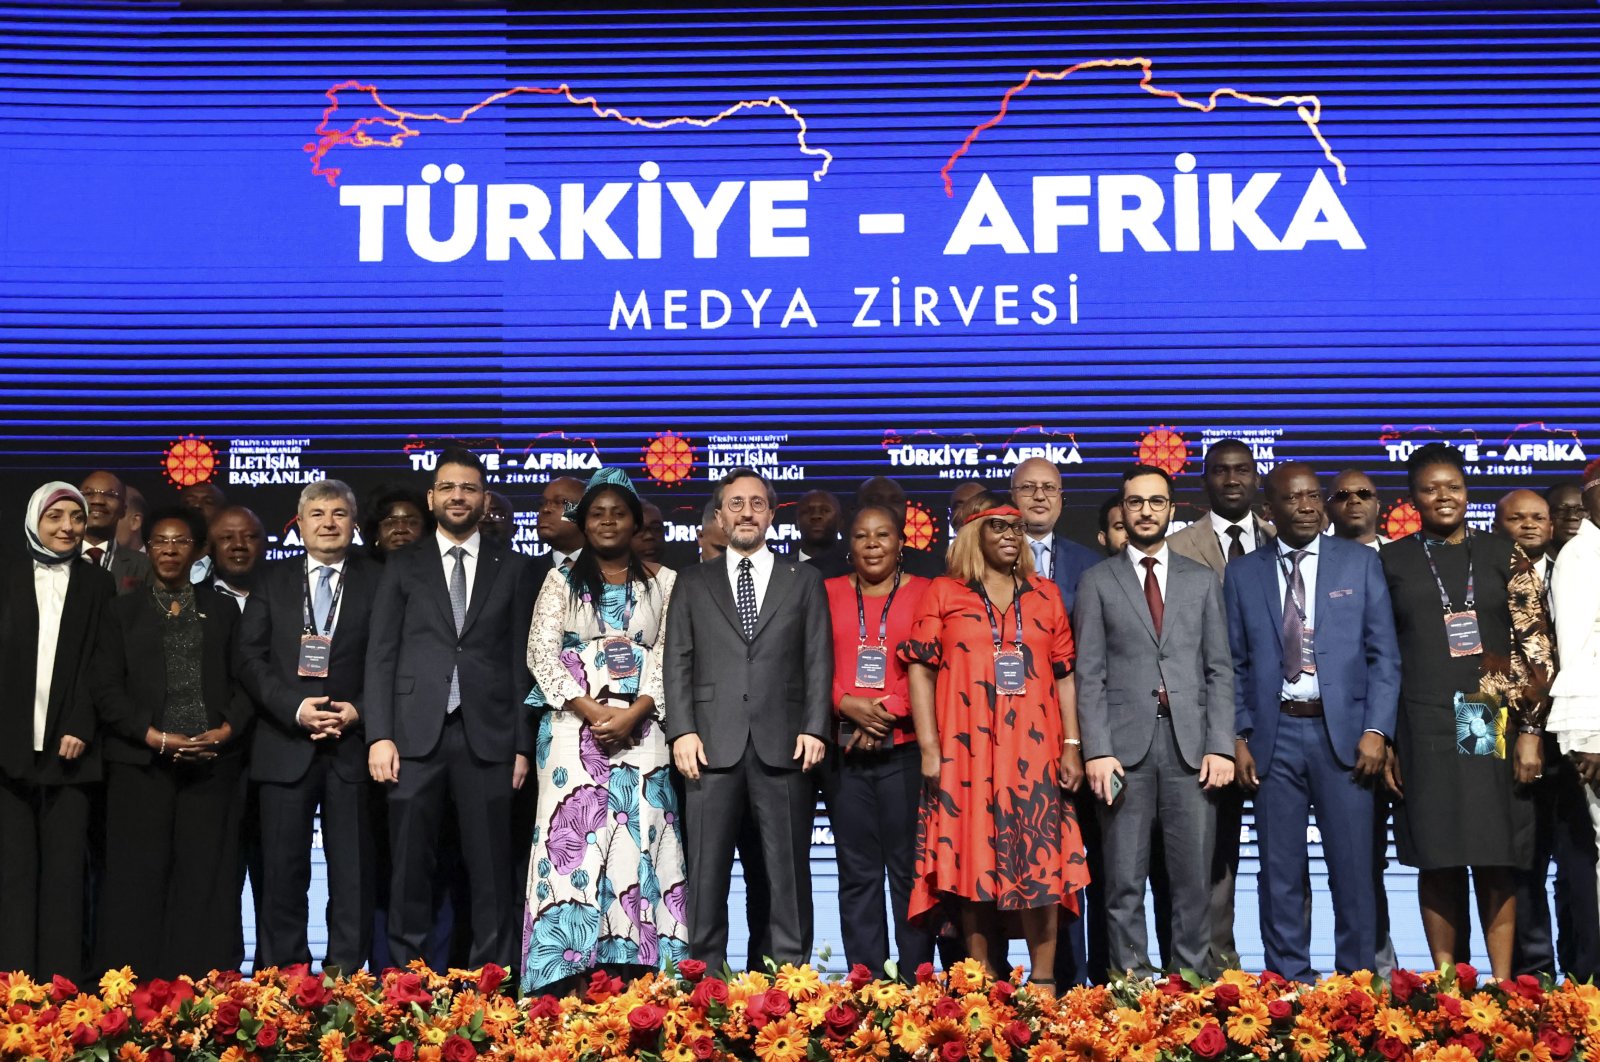 The &quot;Turkey-Africa Media Summit&quot;, organized by the Presidency&#039;s Directorate of Communications on the occasion of May 25 May Africa Day has started. Presidential Communications Director Fahrettin Altun also attended the summit, Istanbul, Turkey, May 25, 2022. (AA Photo)